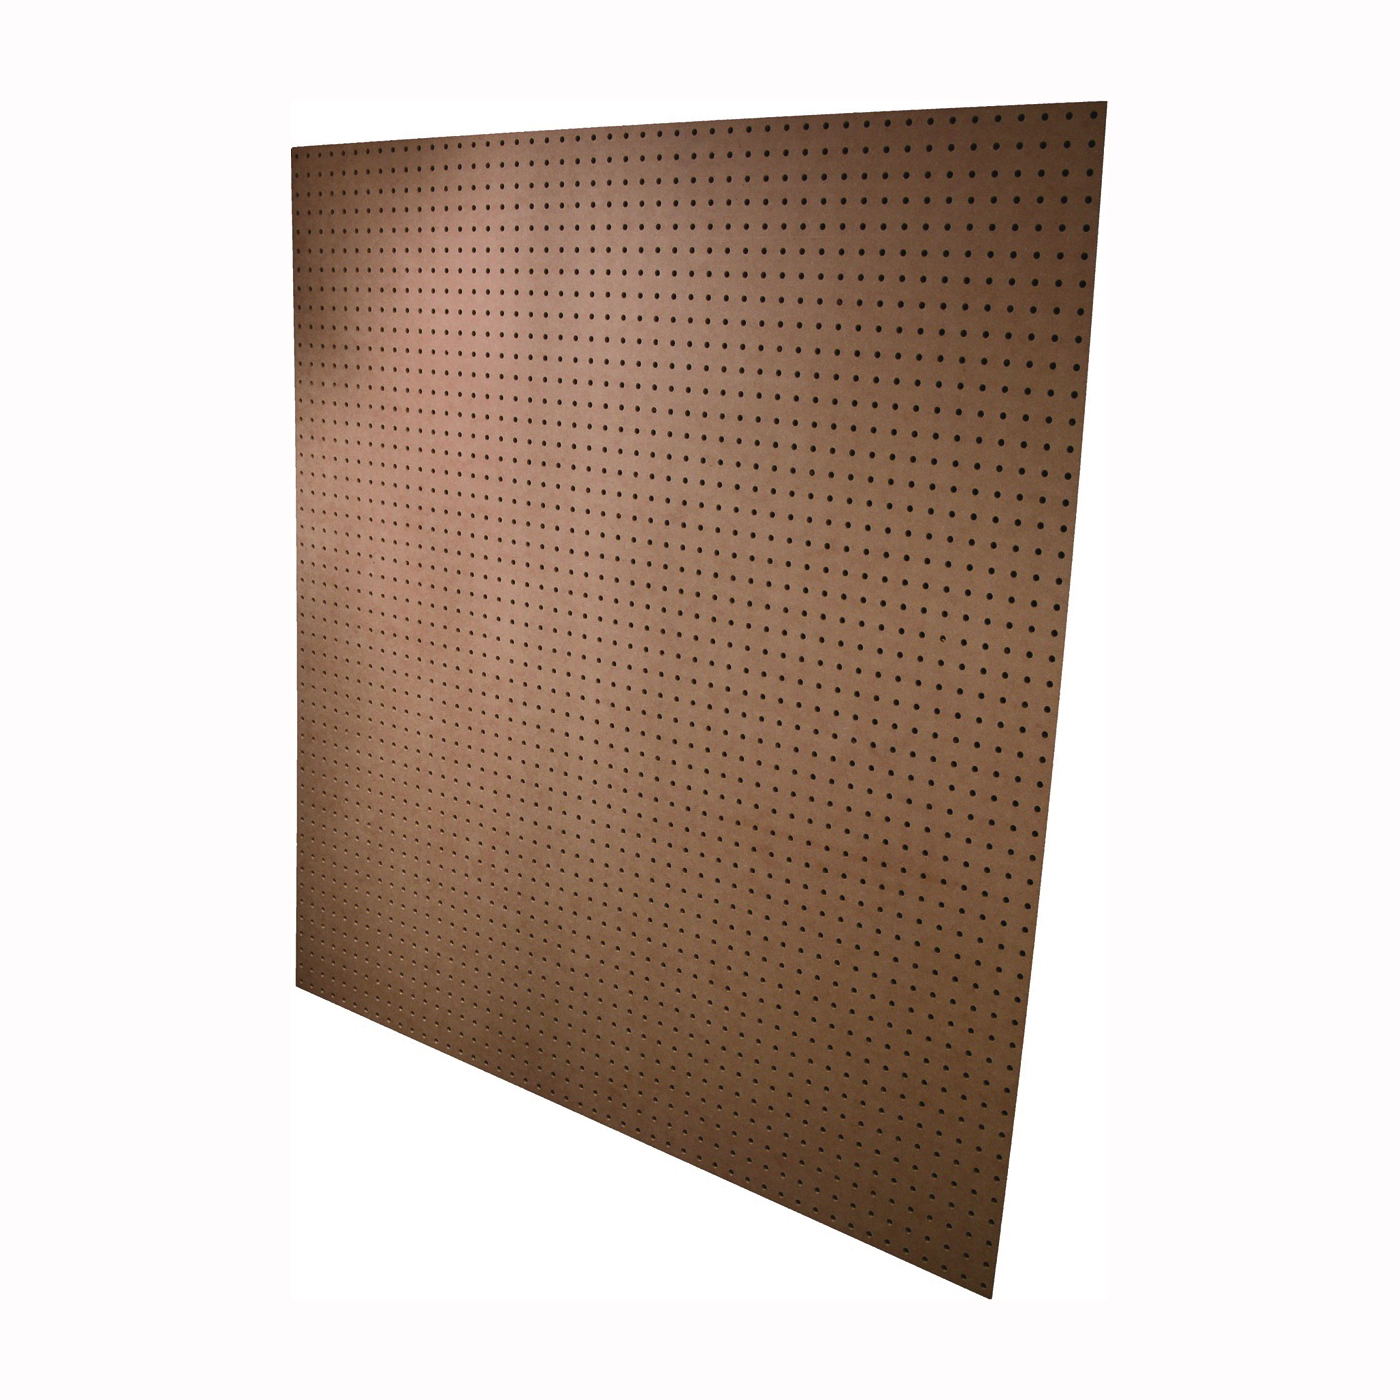 PG002-6H048C Standard Perforated Hardboard, 4 ft OAW, 4 ft OAH, Plywood